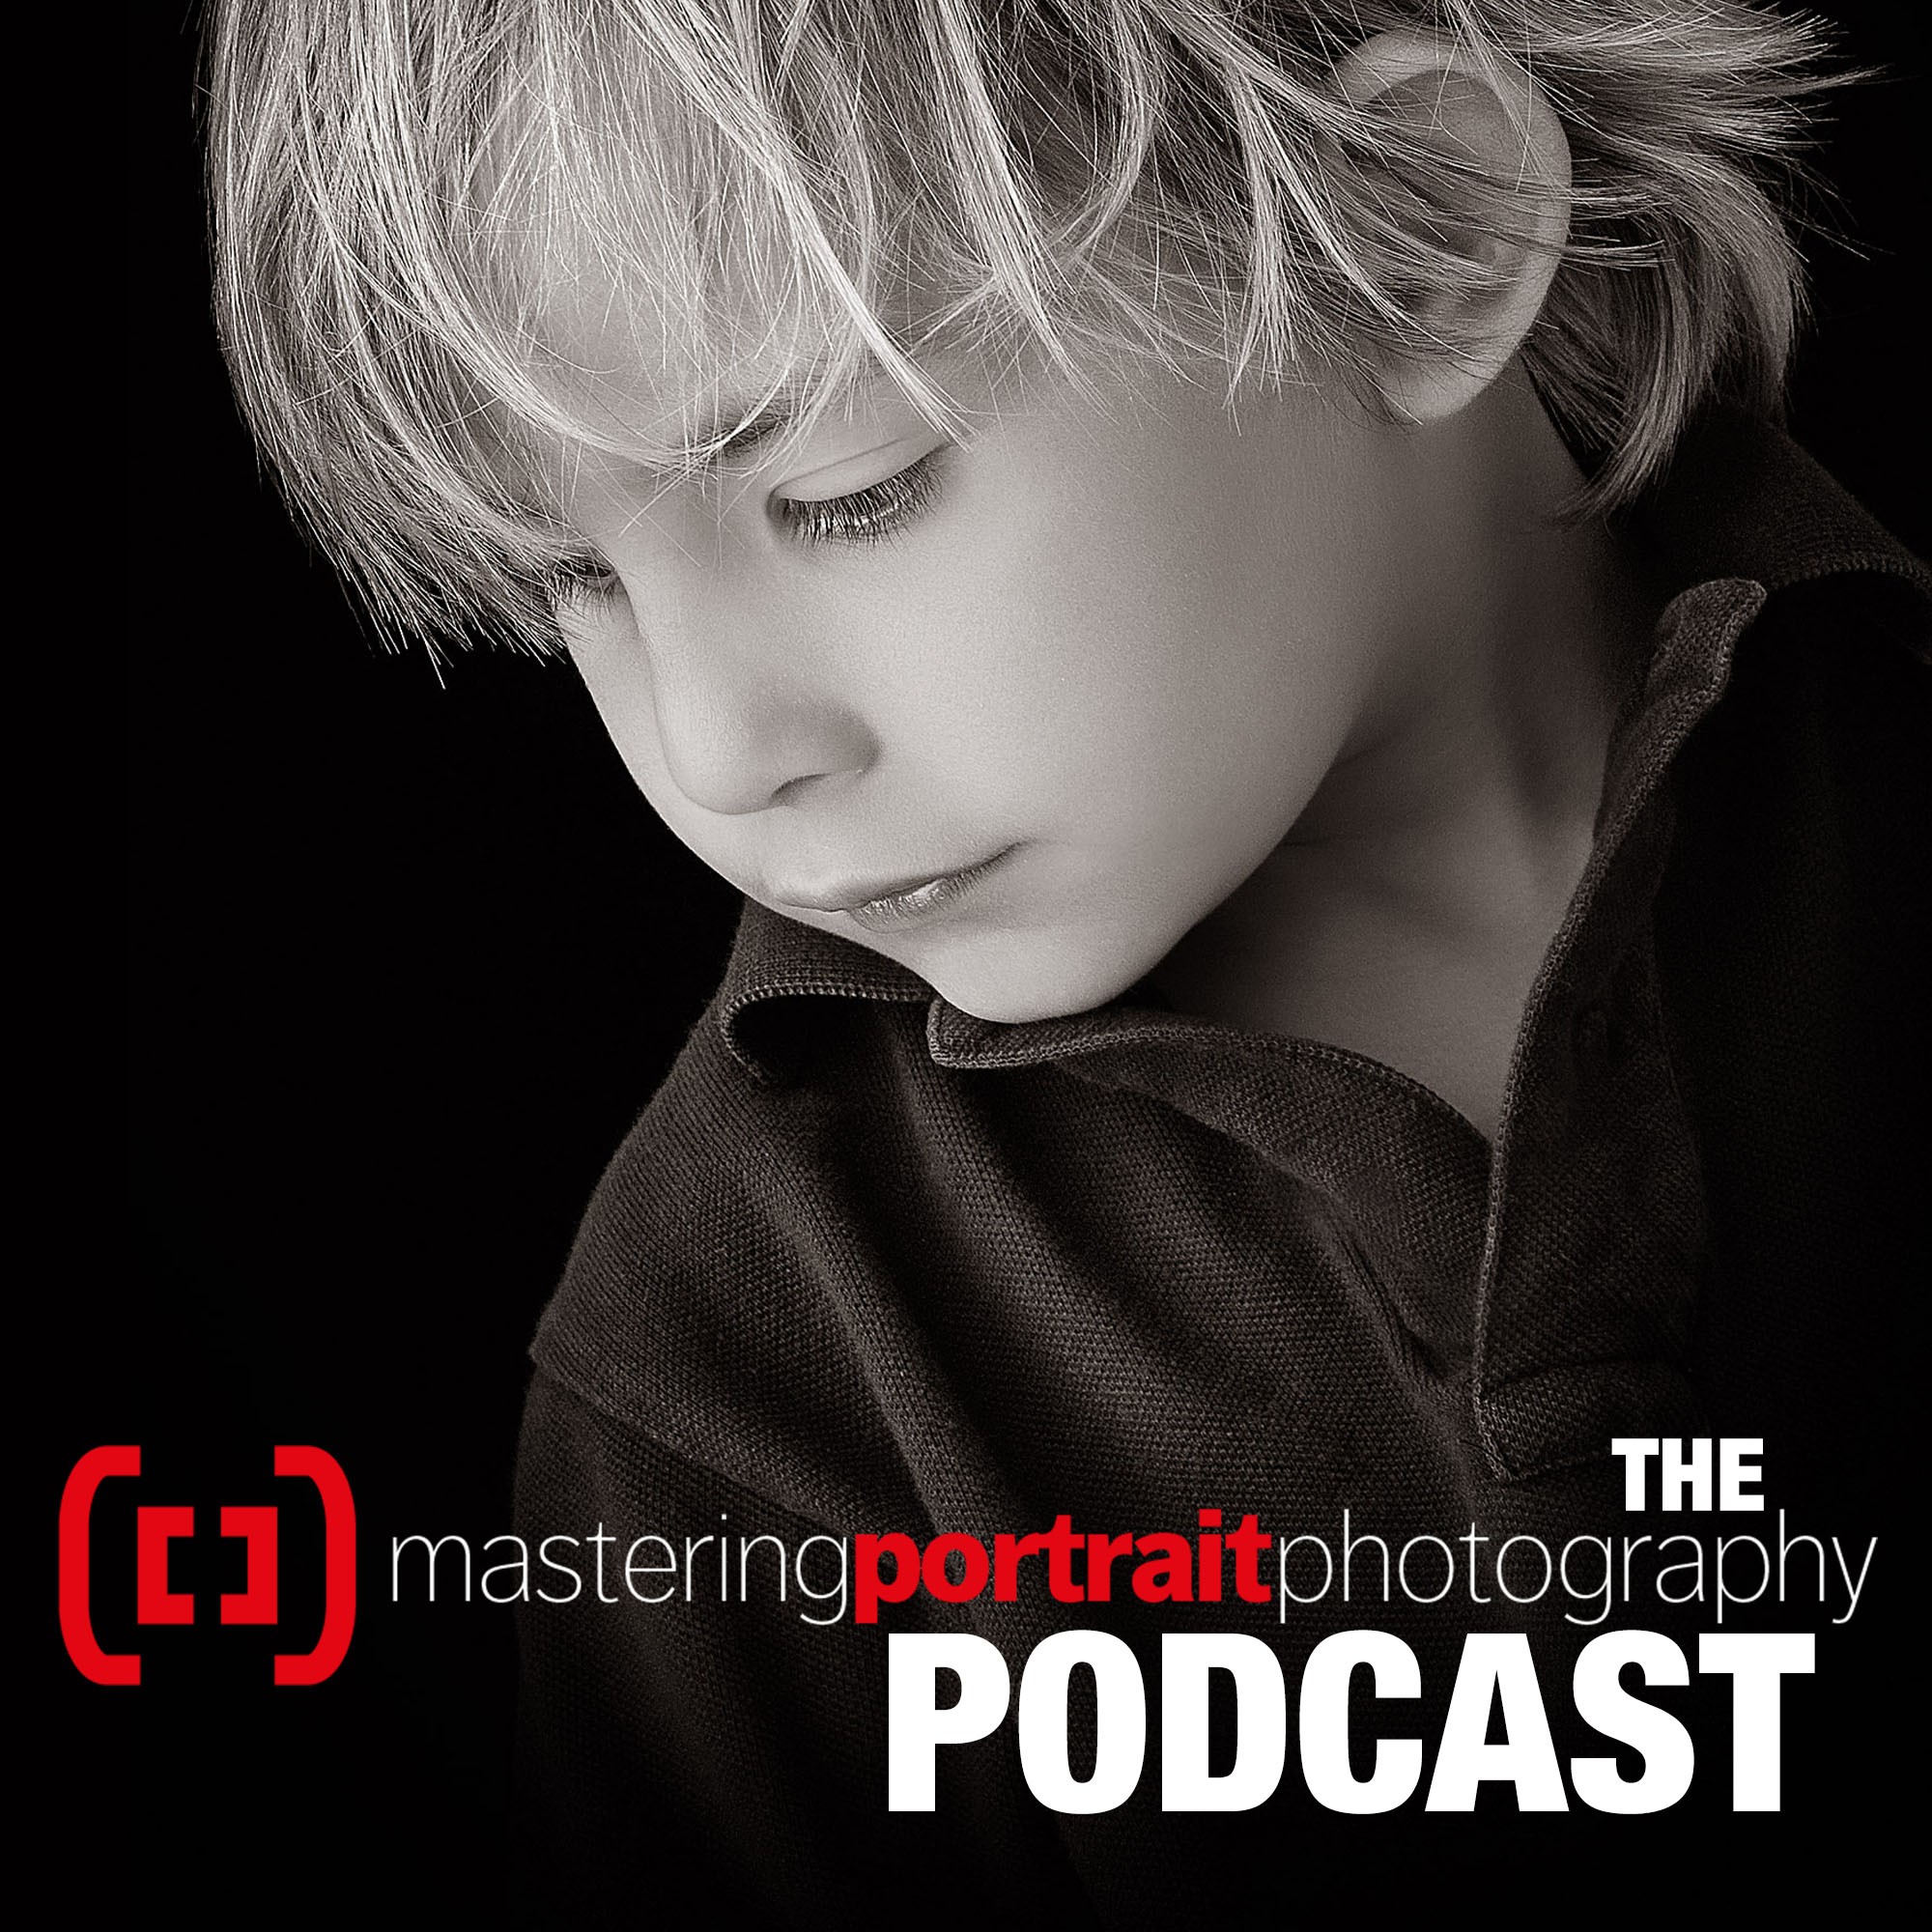 The Mastering Portrait Photography Podcast